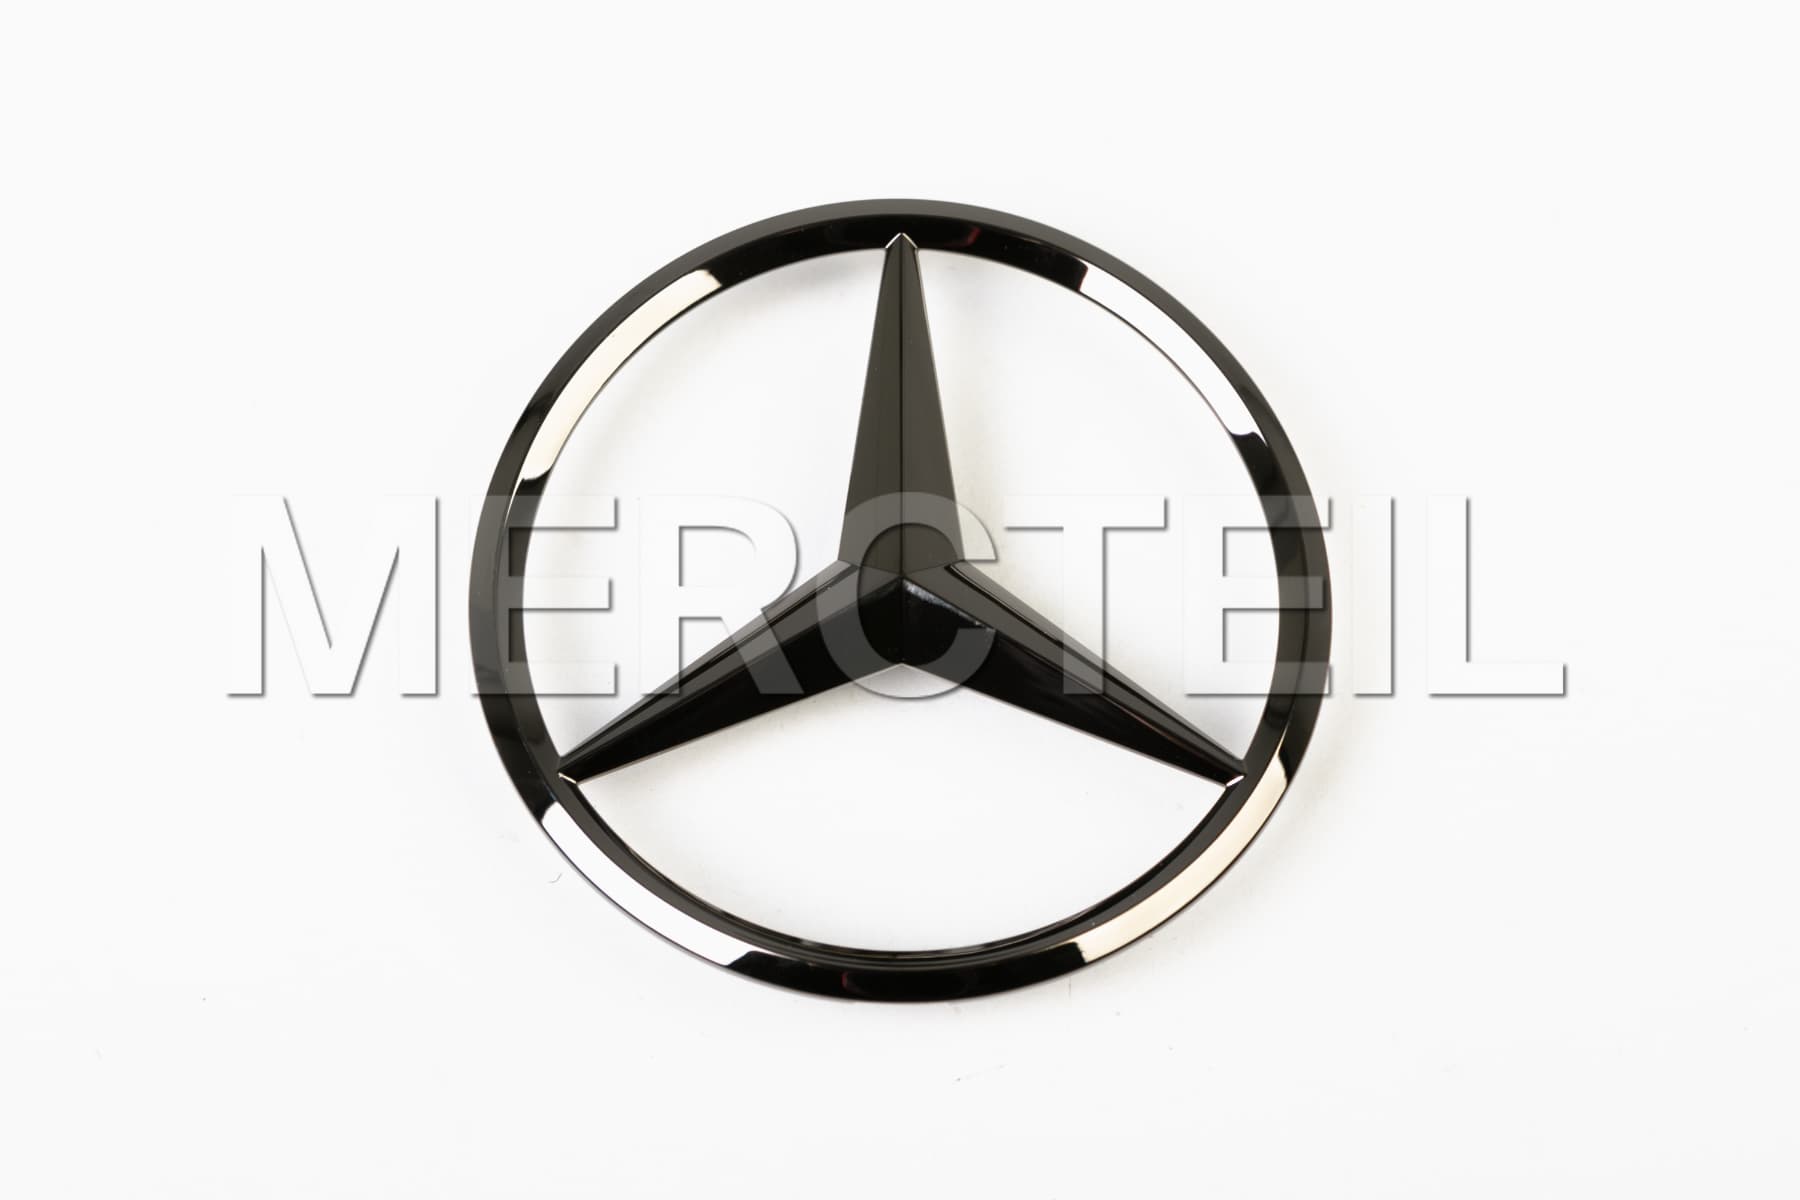 A-Class Sedan Trunk Star Badge - Black Night Package V177 Genuine Mercedes-AMG (Part number: A1778178100)